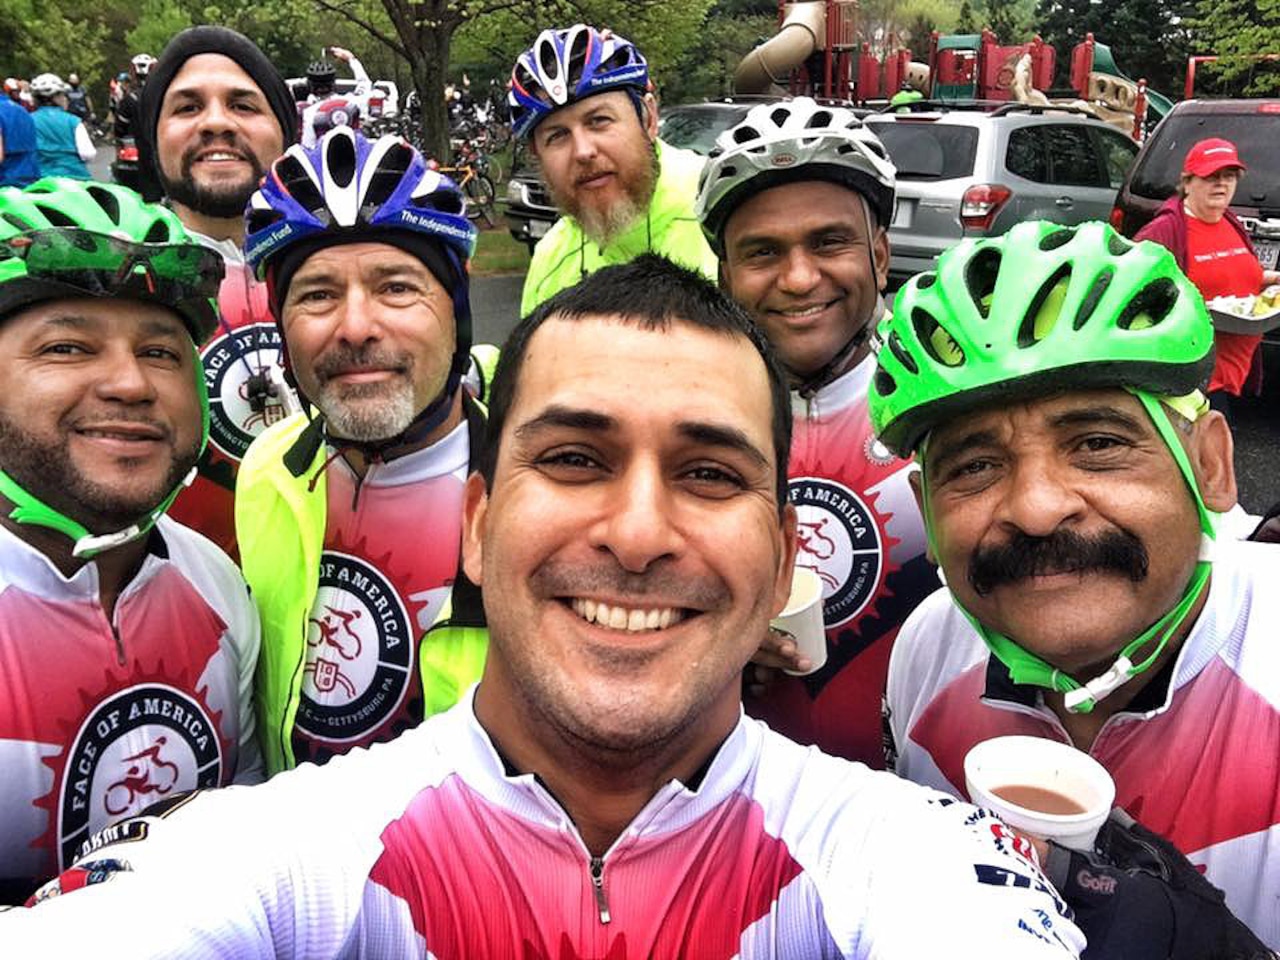 Army veteran Sgt. Norberto Roman stops to take a photo with his teammates before taking on the two-day, 110-mile Face of America bike ride from Arlington, Va., to Gettysburg, Pa., April 25-26, 2015. Courtesy photo